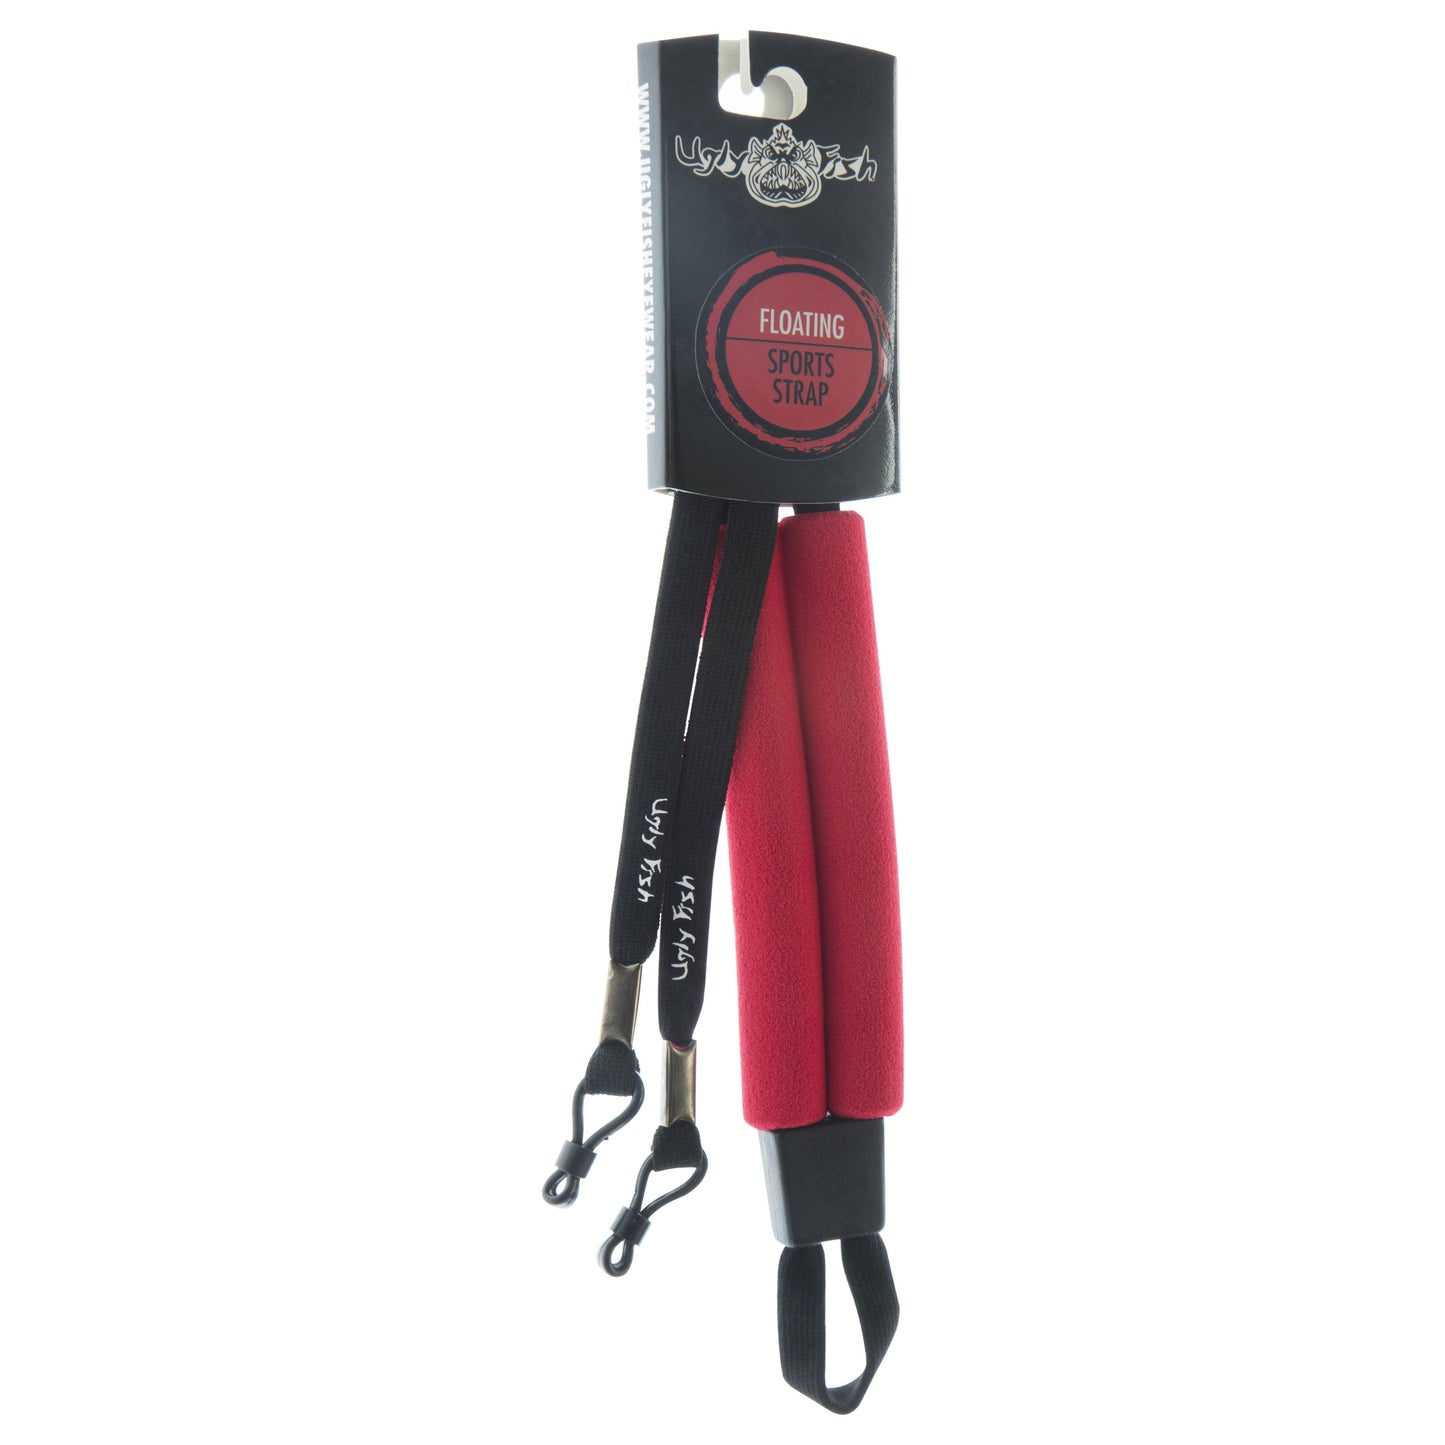 Floating Sports Strap - Red